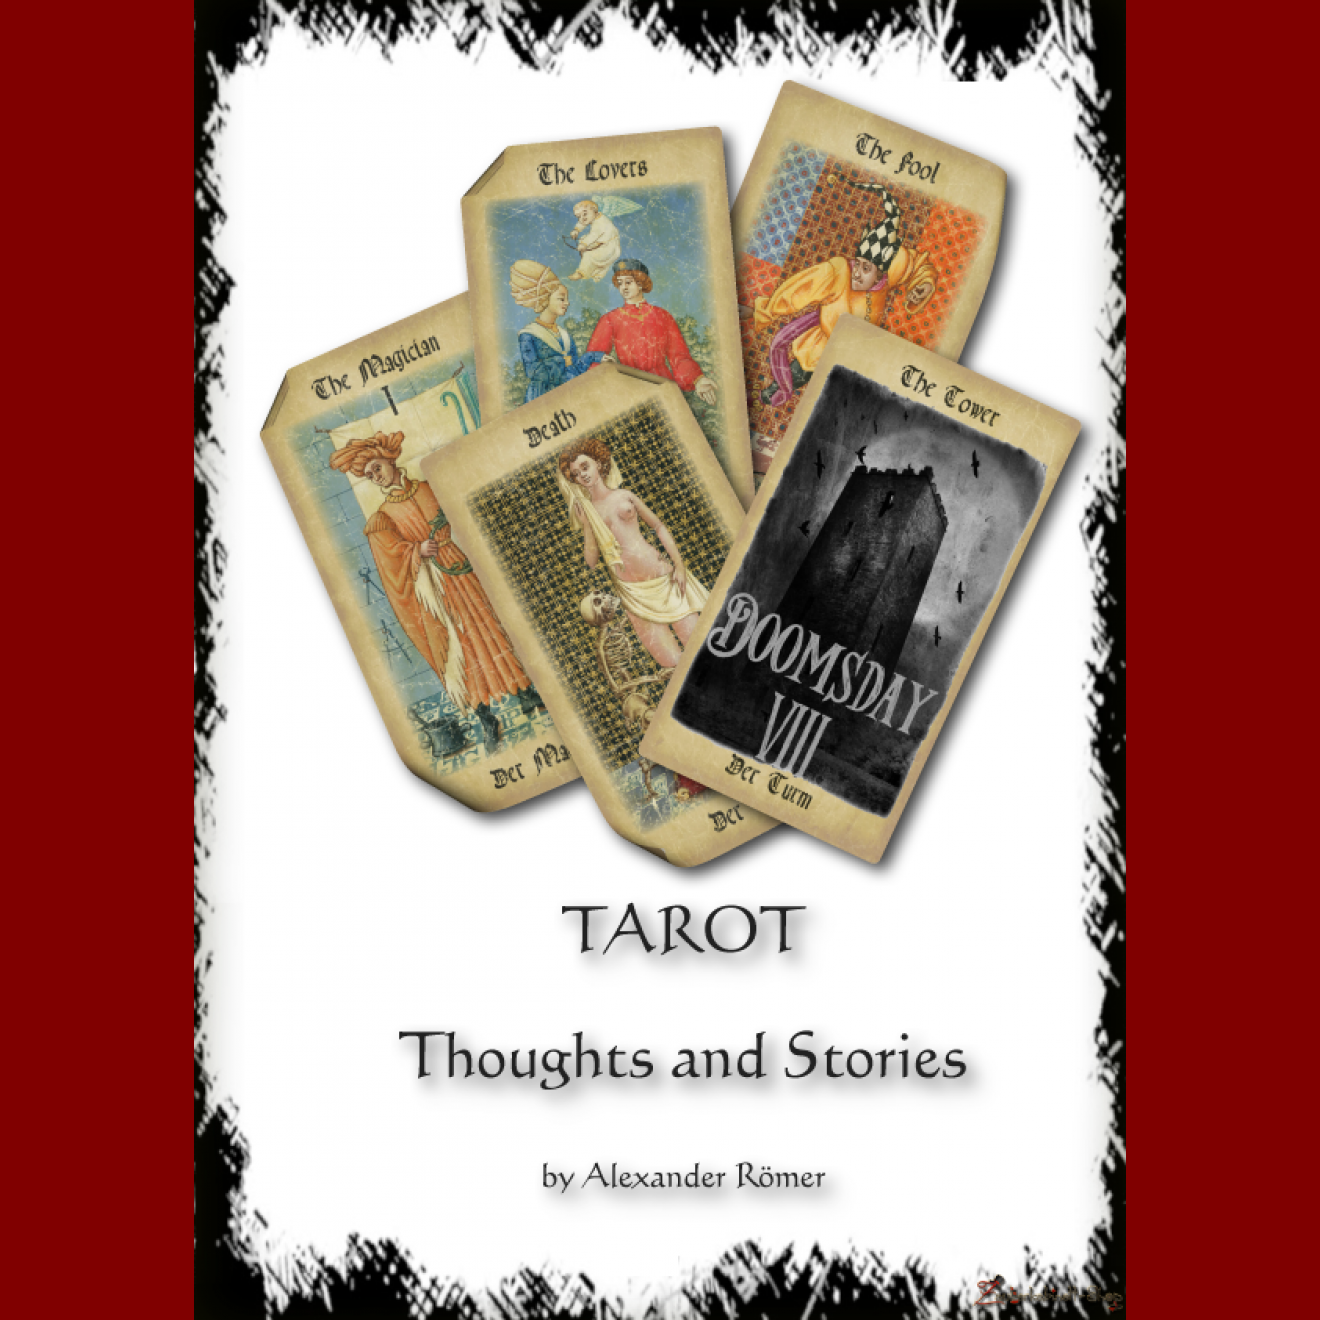 Tarot - Thoughts and Stories by A. Römer